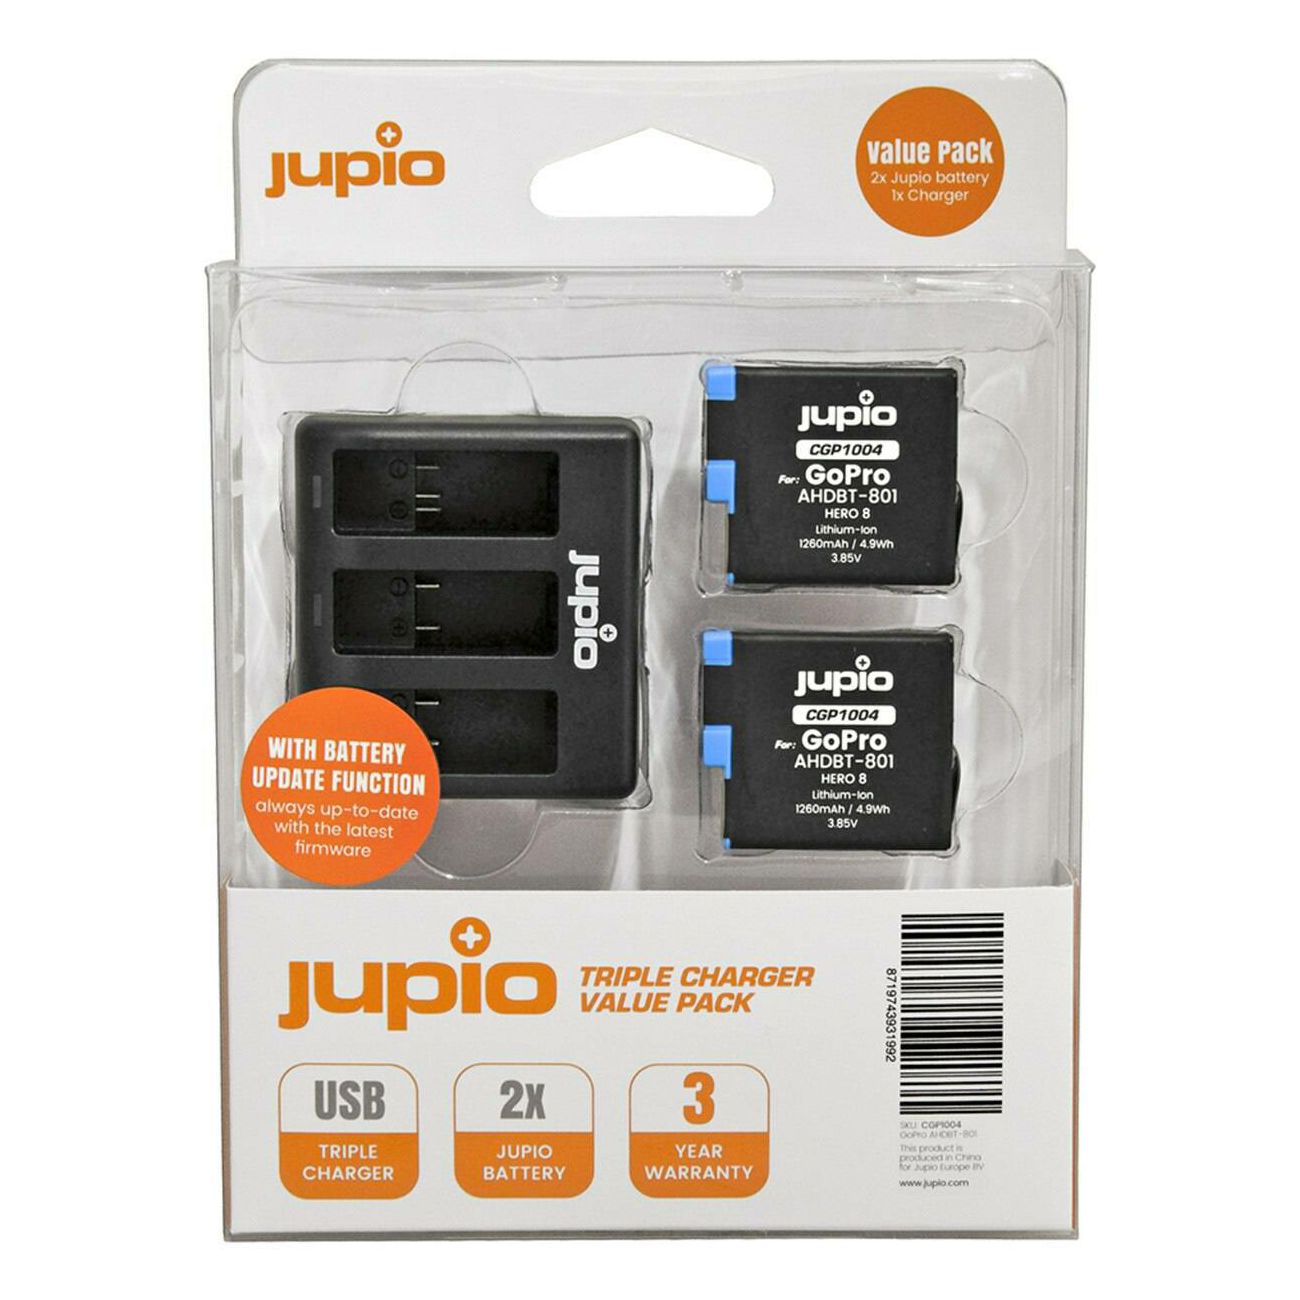 Jupio Value Pack: 2x Battery GoPro HERO8 AHDBT-801 1260mAh + Compact USB Triple Charger (update version) Lithium-Ion Battery Pack (CGP1004)